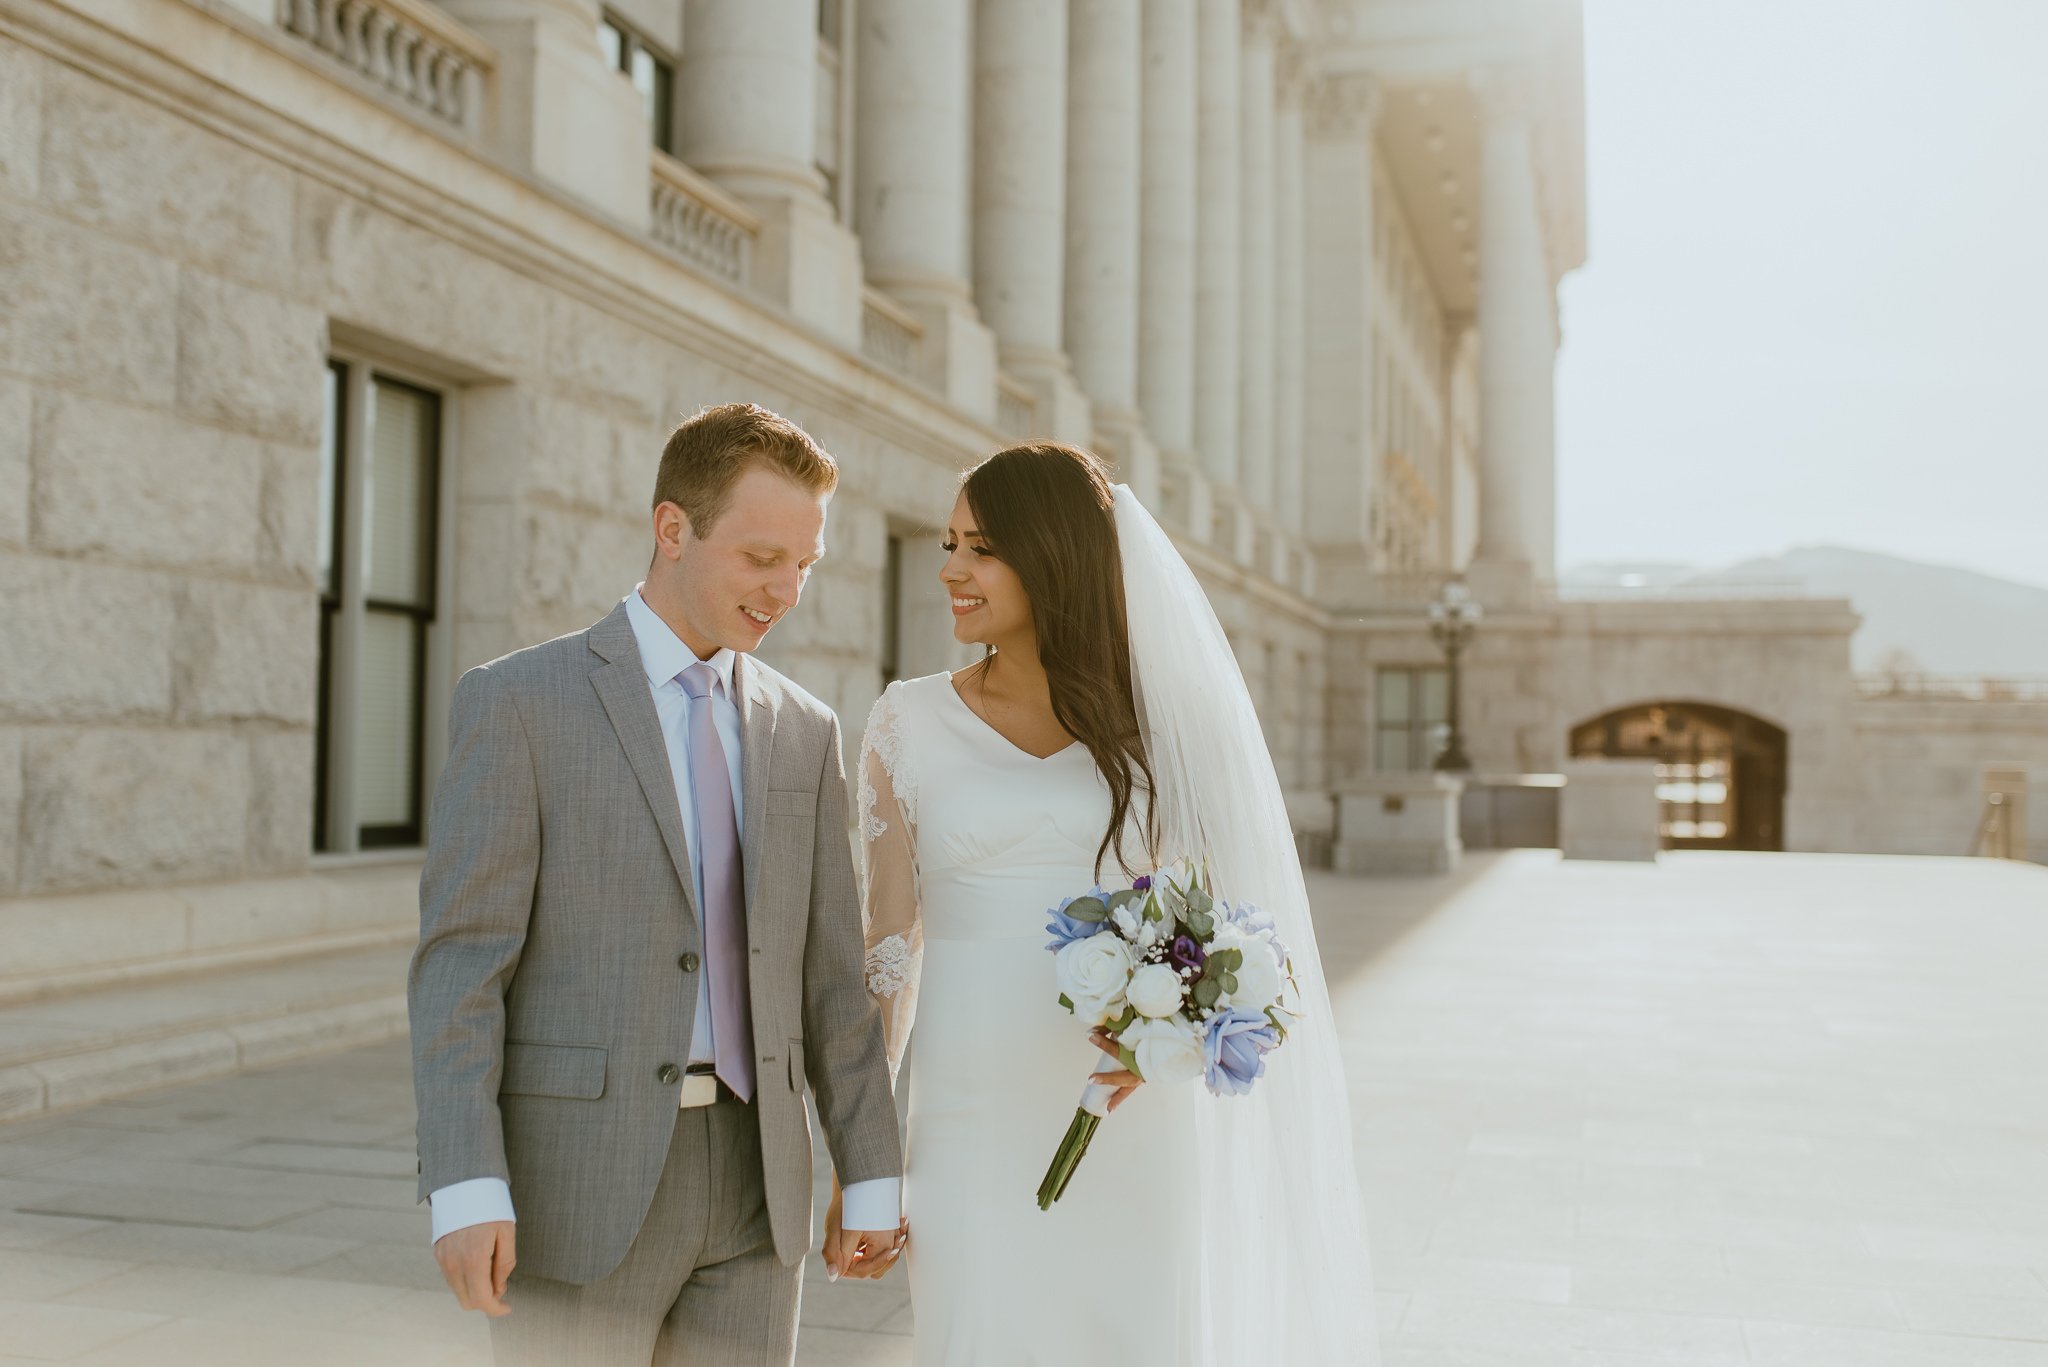 Utah-State-Capitol-Spring-Blossons-Bountiful-LDS-Wedding-Hopesandcheers-photo-12